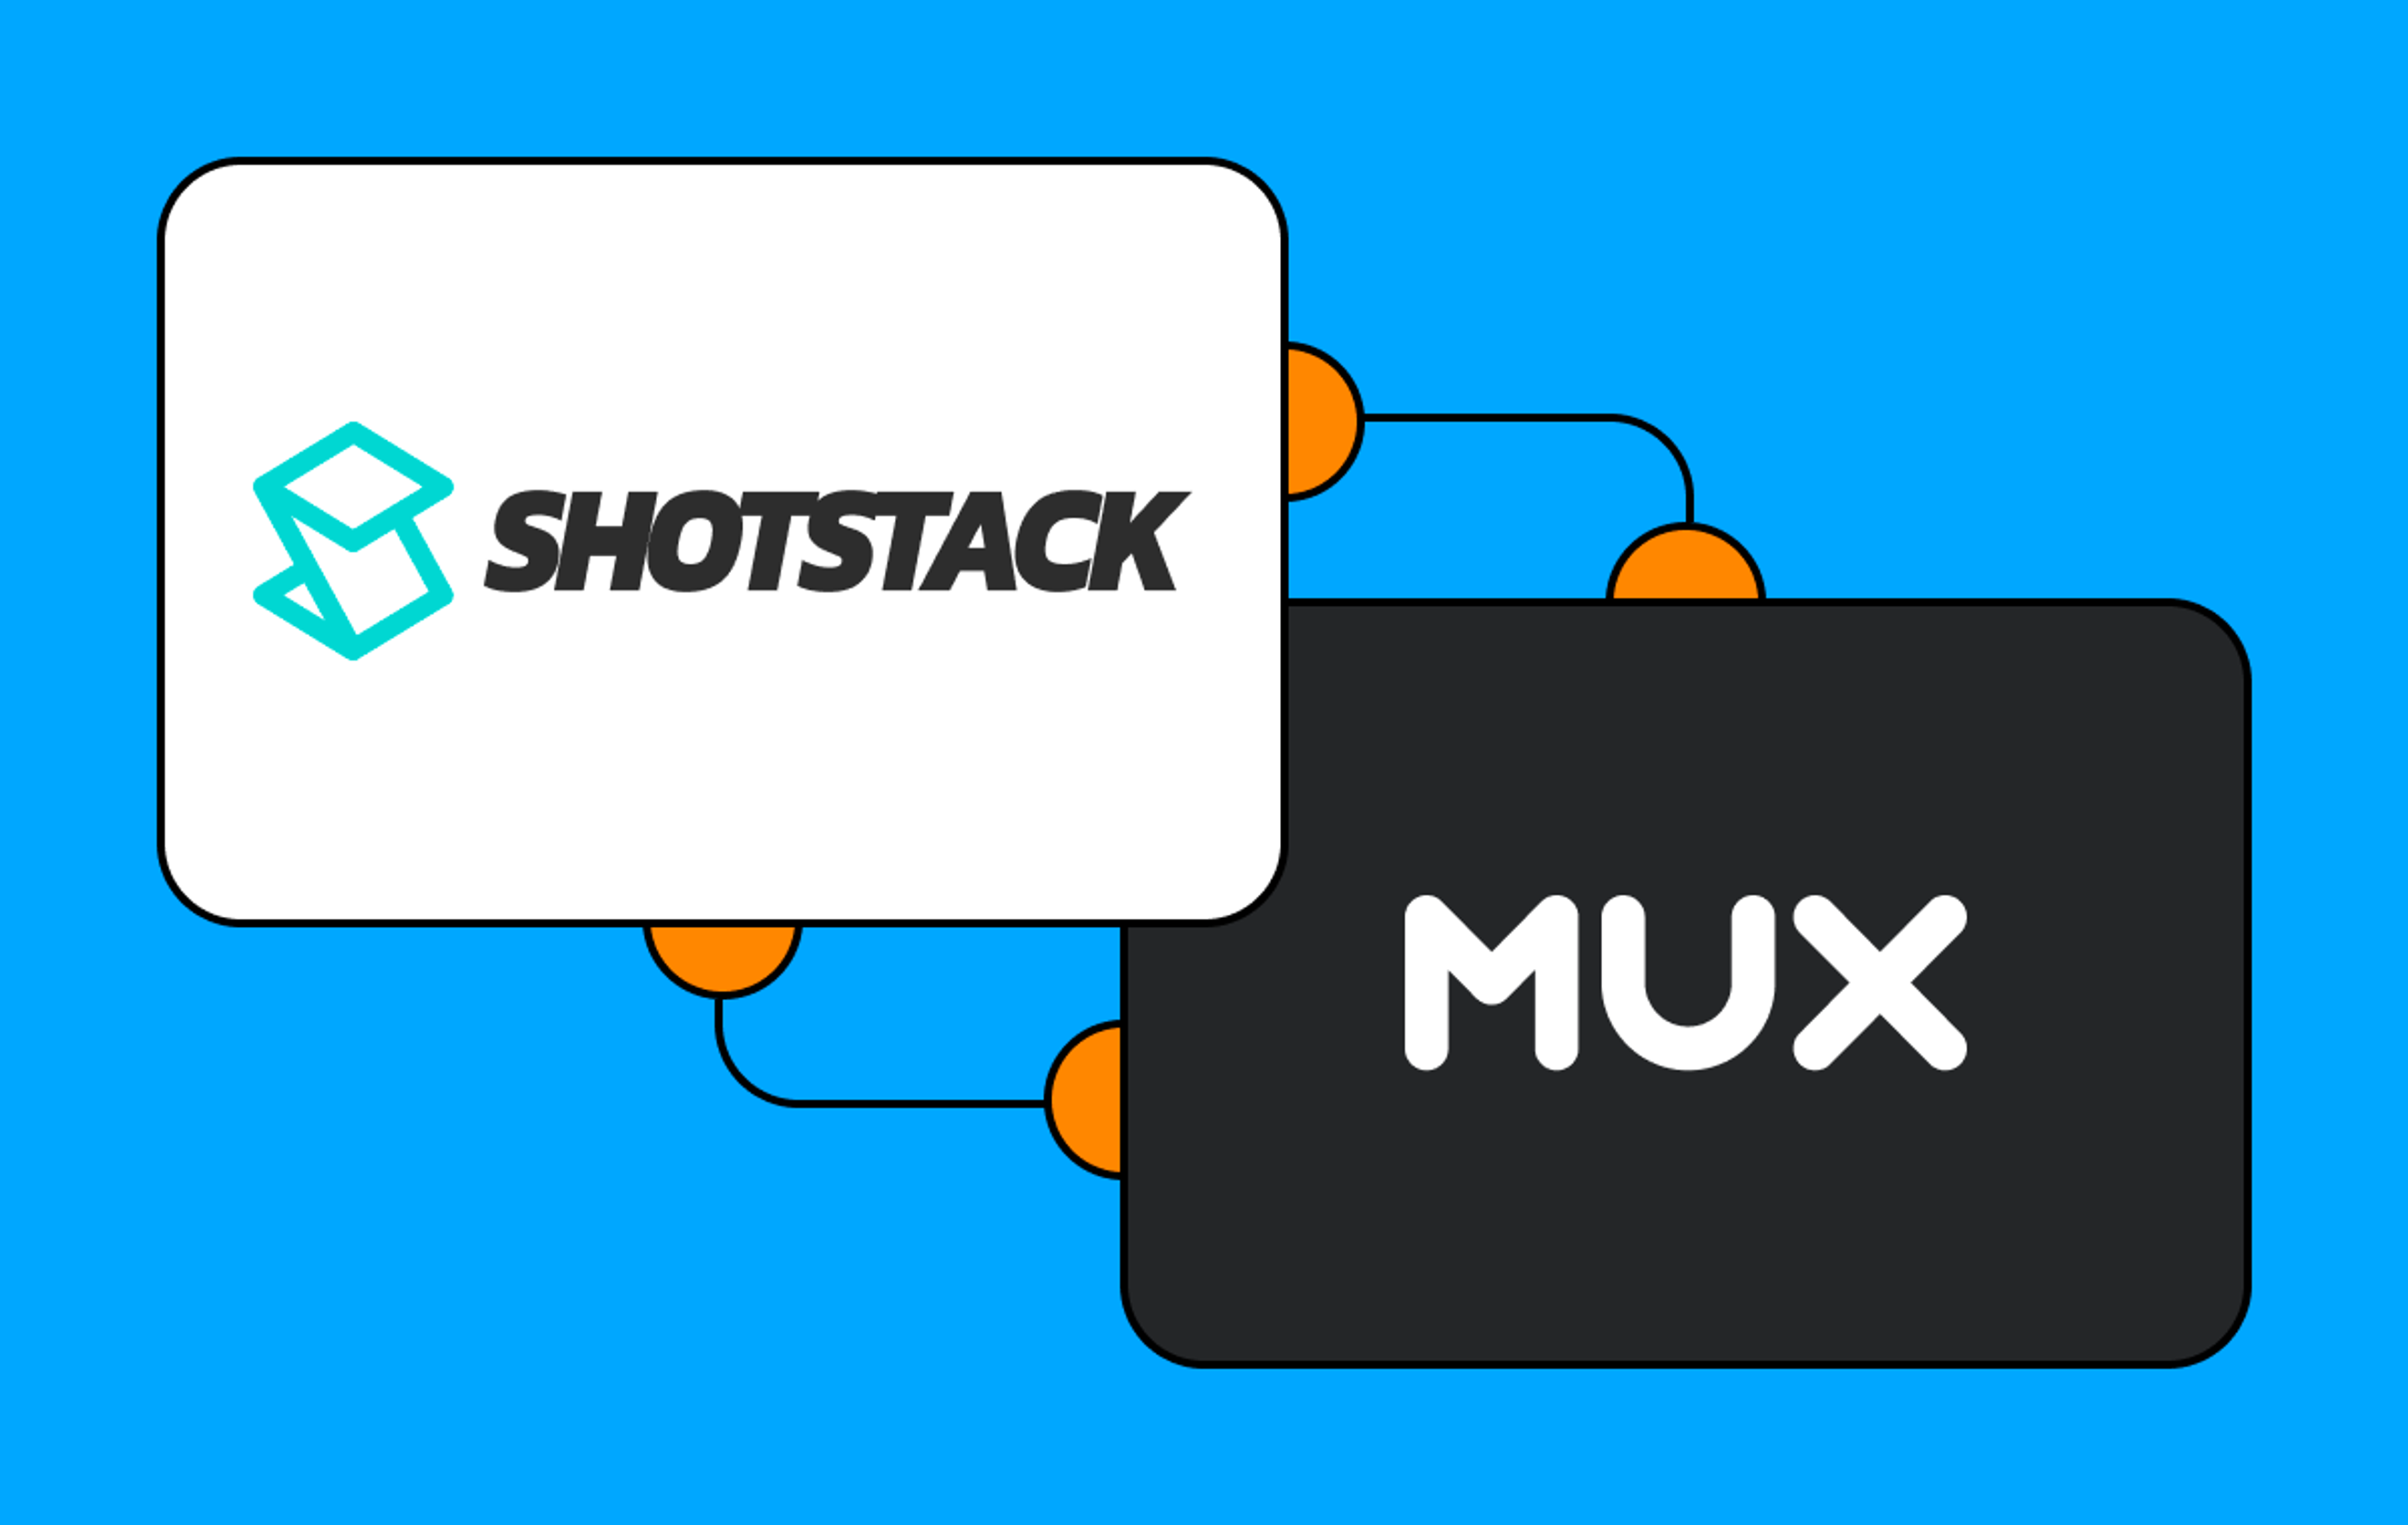 A partnership design featuring the Mux and Shotstack logos